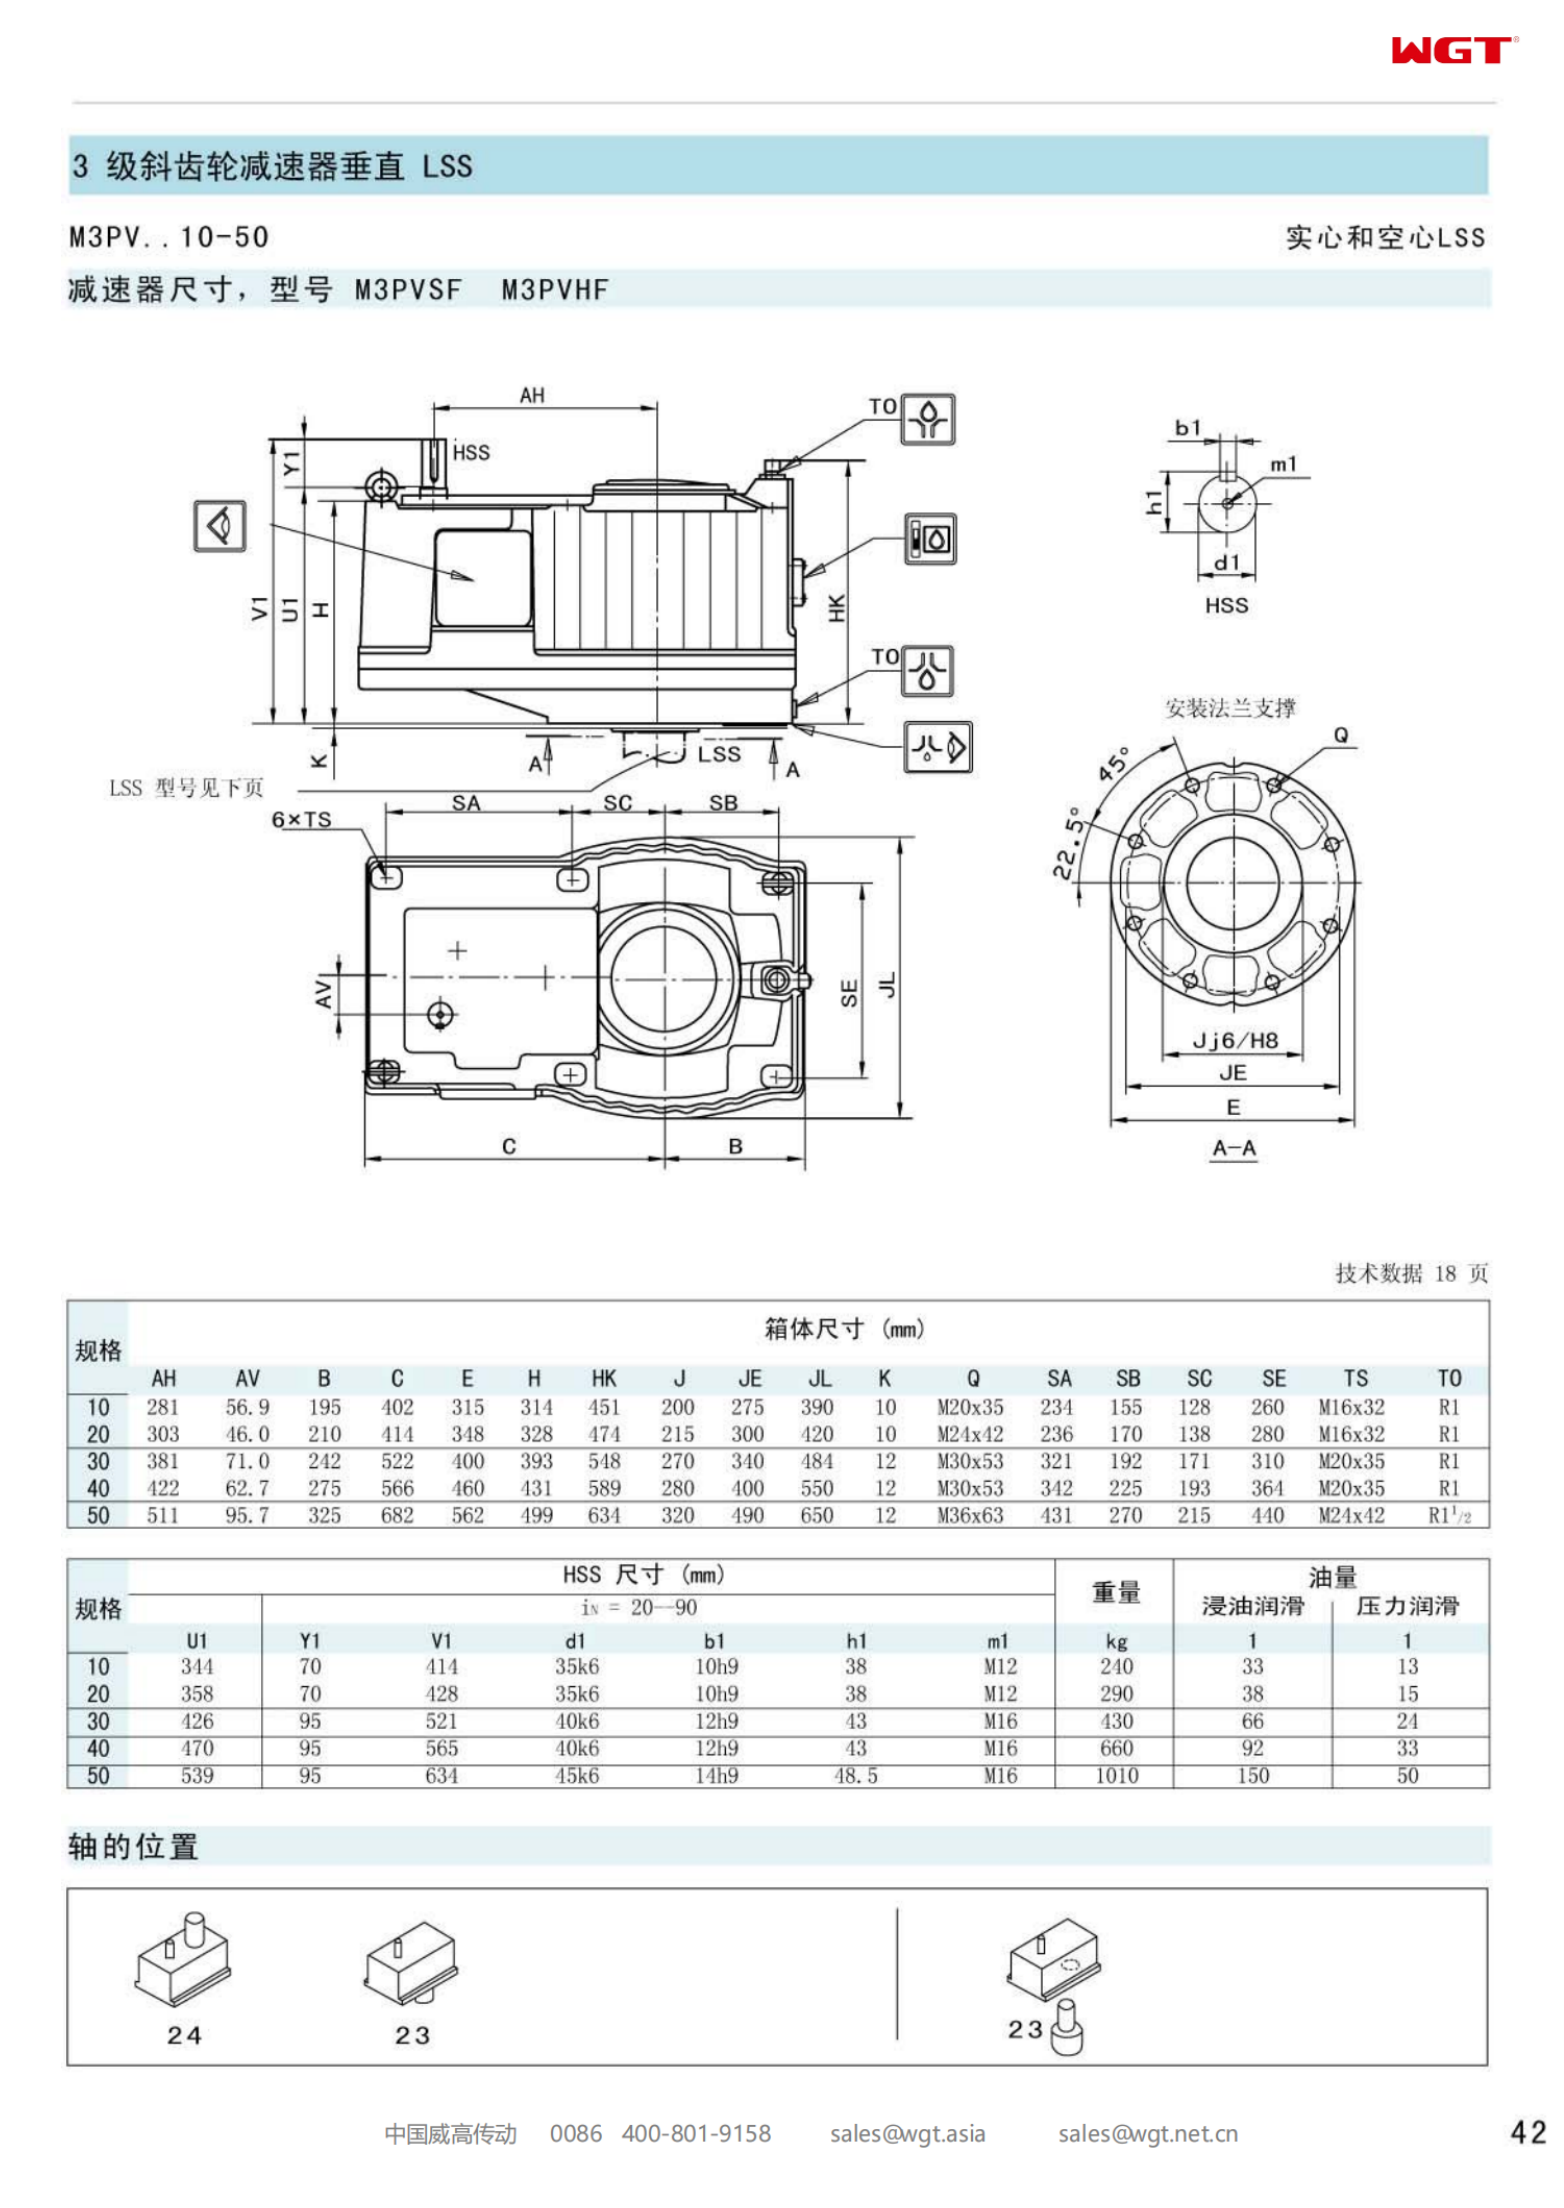 M3PVHF40 Replace_SEW_M_Series Gearbox